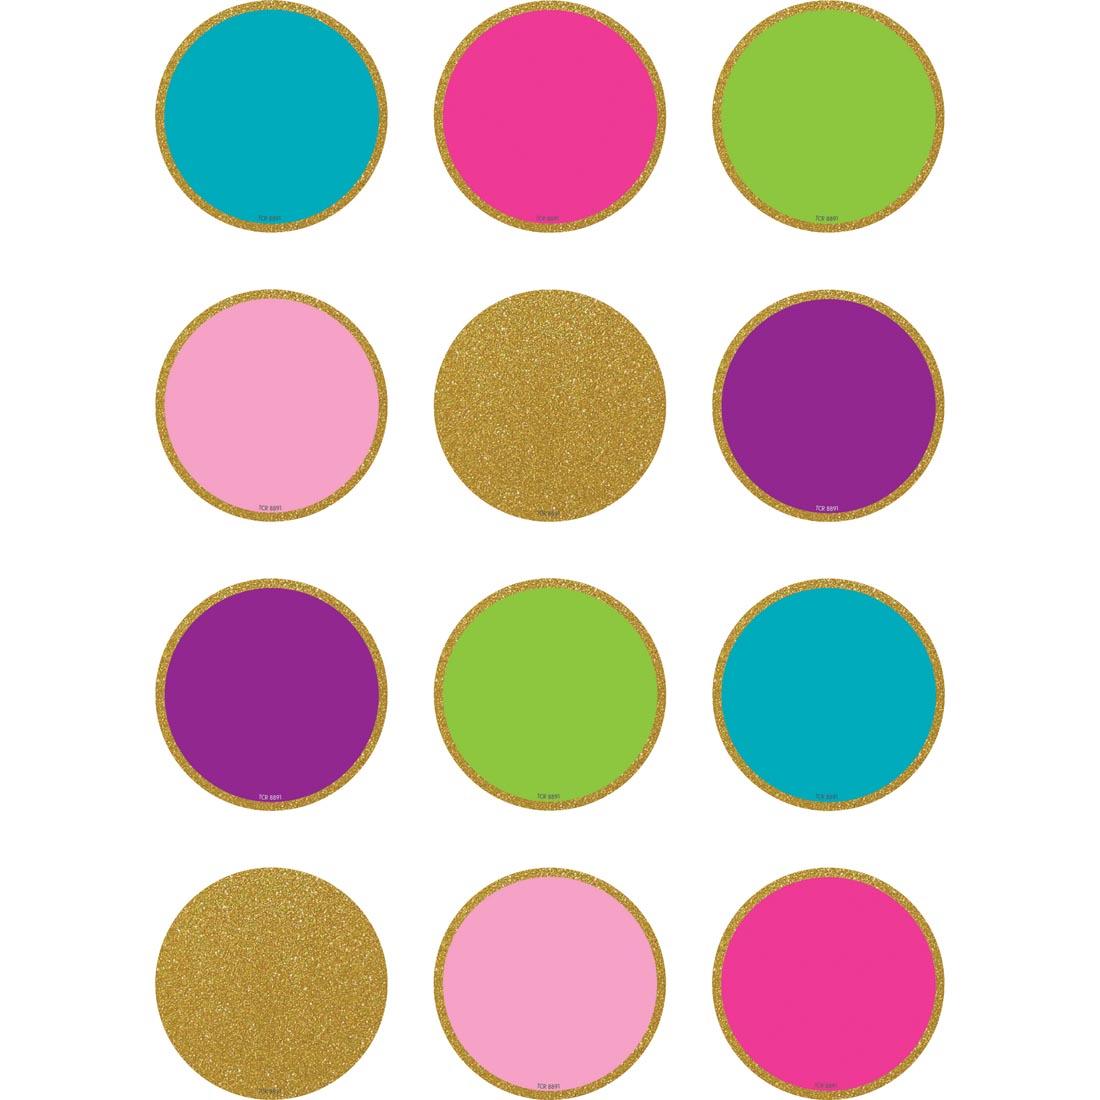 Colorful Circles Mini Accents from the Confetti collection by Teacher Created Resources